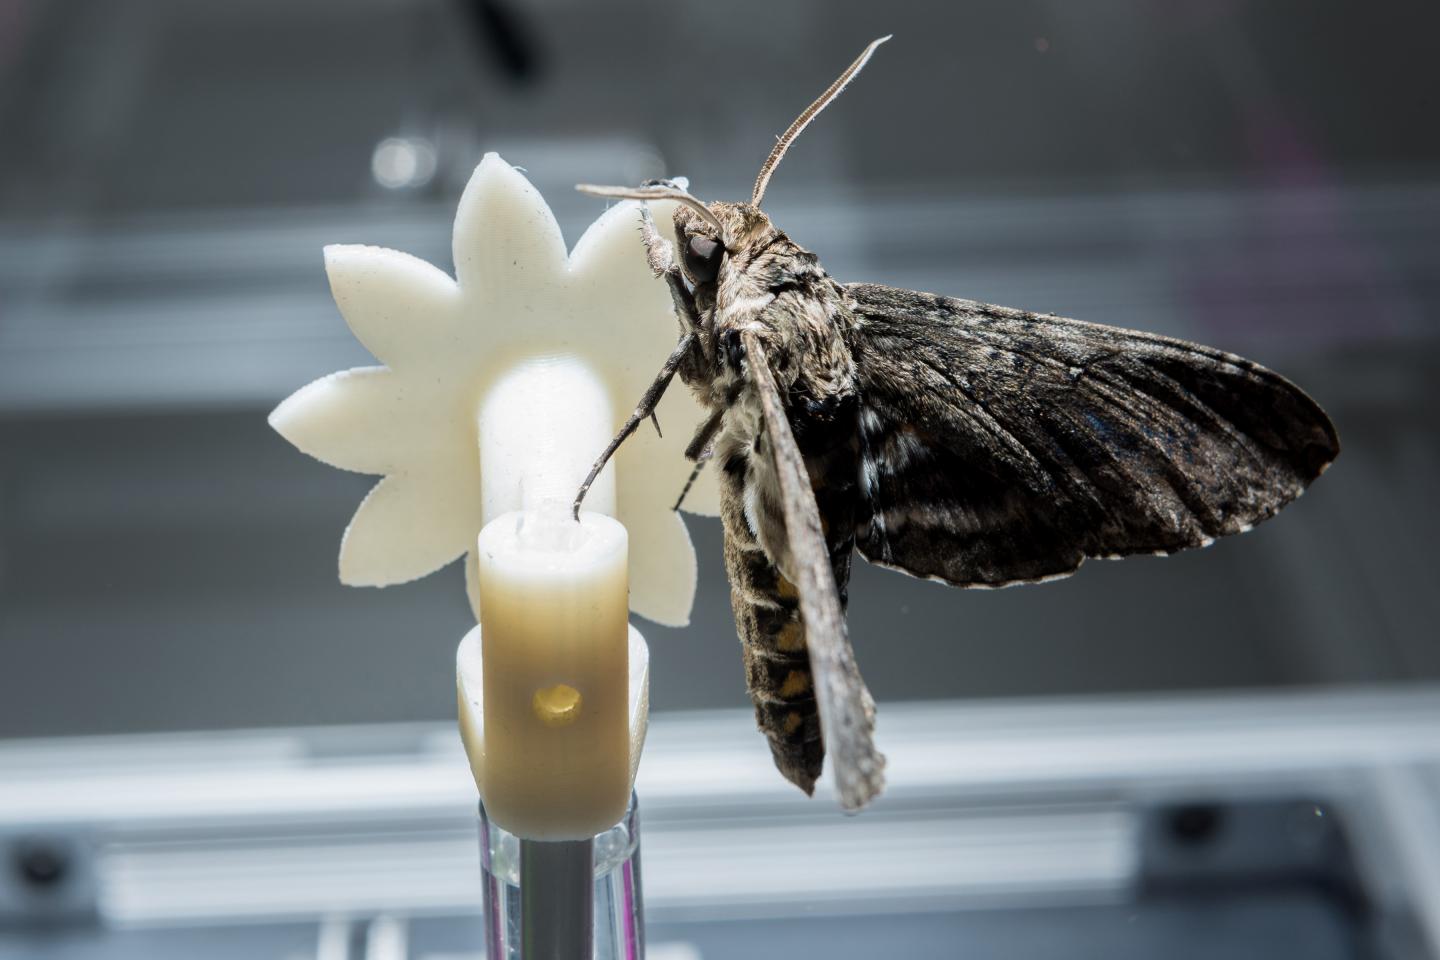 Hawkmoth Clings to a Robotic Flower